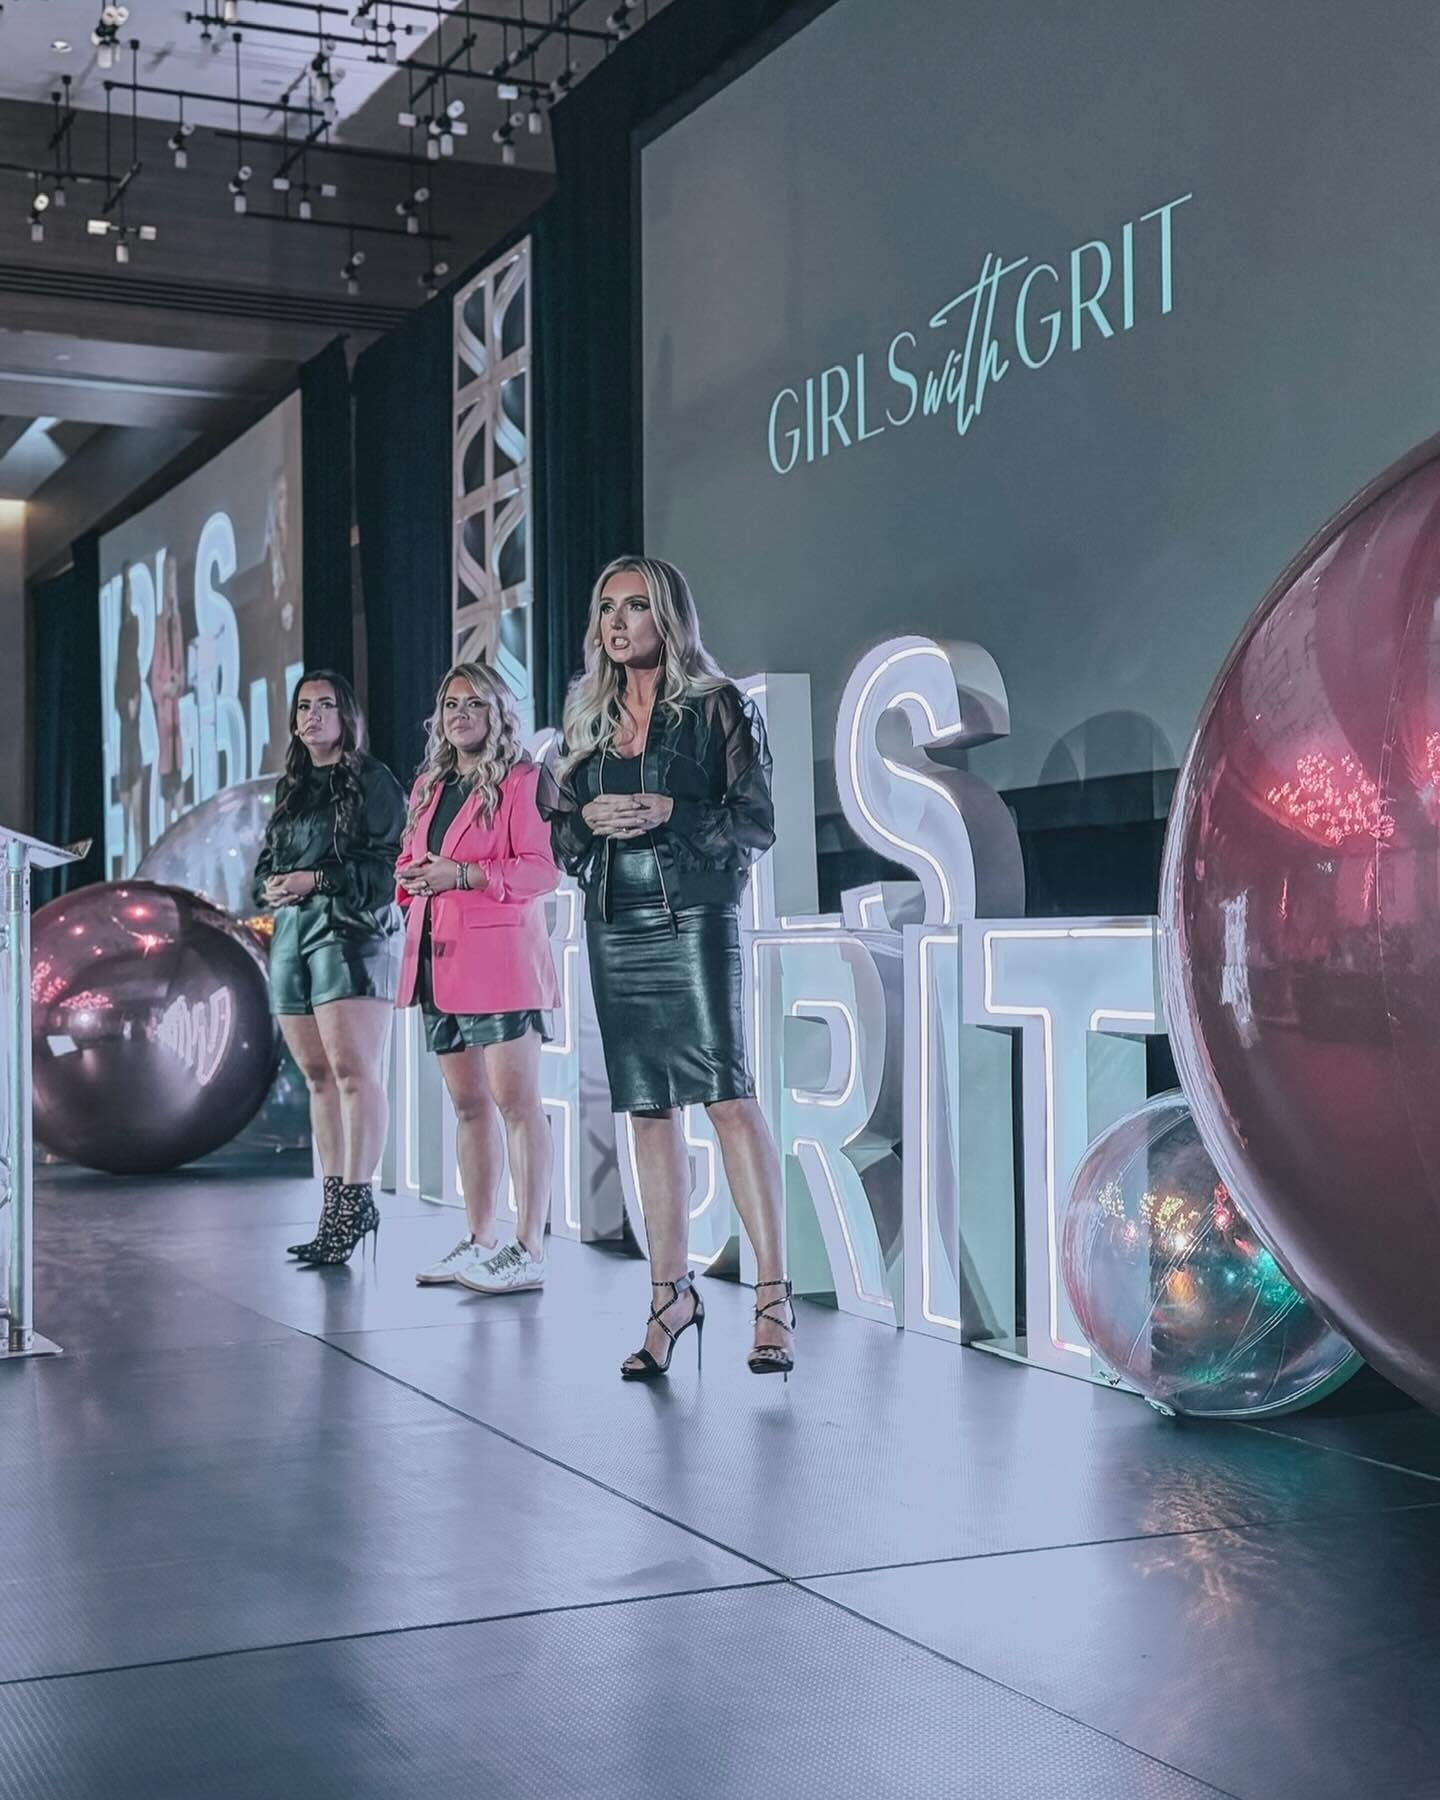 I get asked, &quot;Are you still selling homes?&quot;

The short answer: 𝘆𝗲𝘀. 

I 𝘭𝘰𝘷𝘦 coaching. It has led me to meet some of the most amazing women in this industry. 💗

But I'm not coaching women in real estate because it gets me out of sel